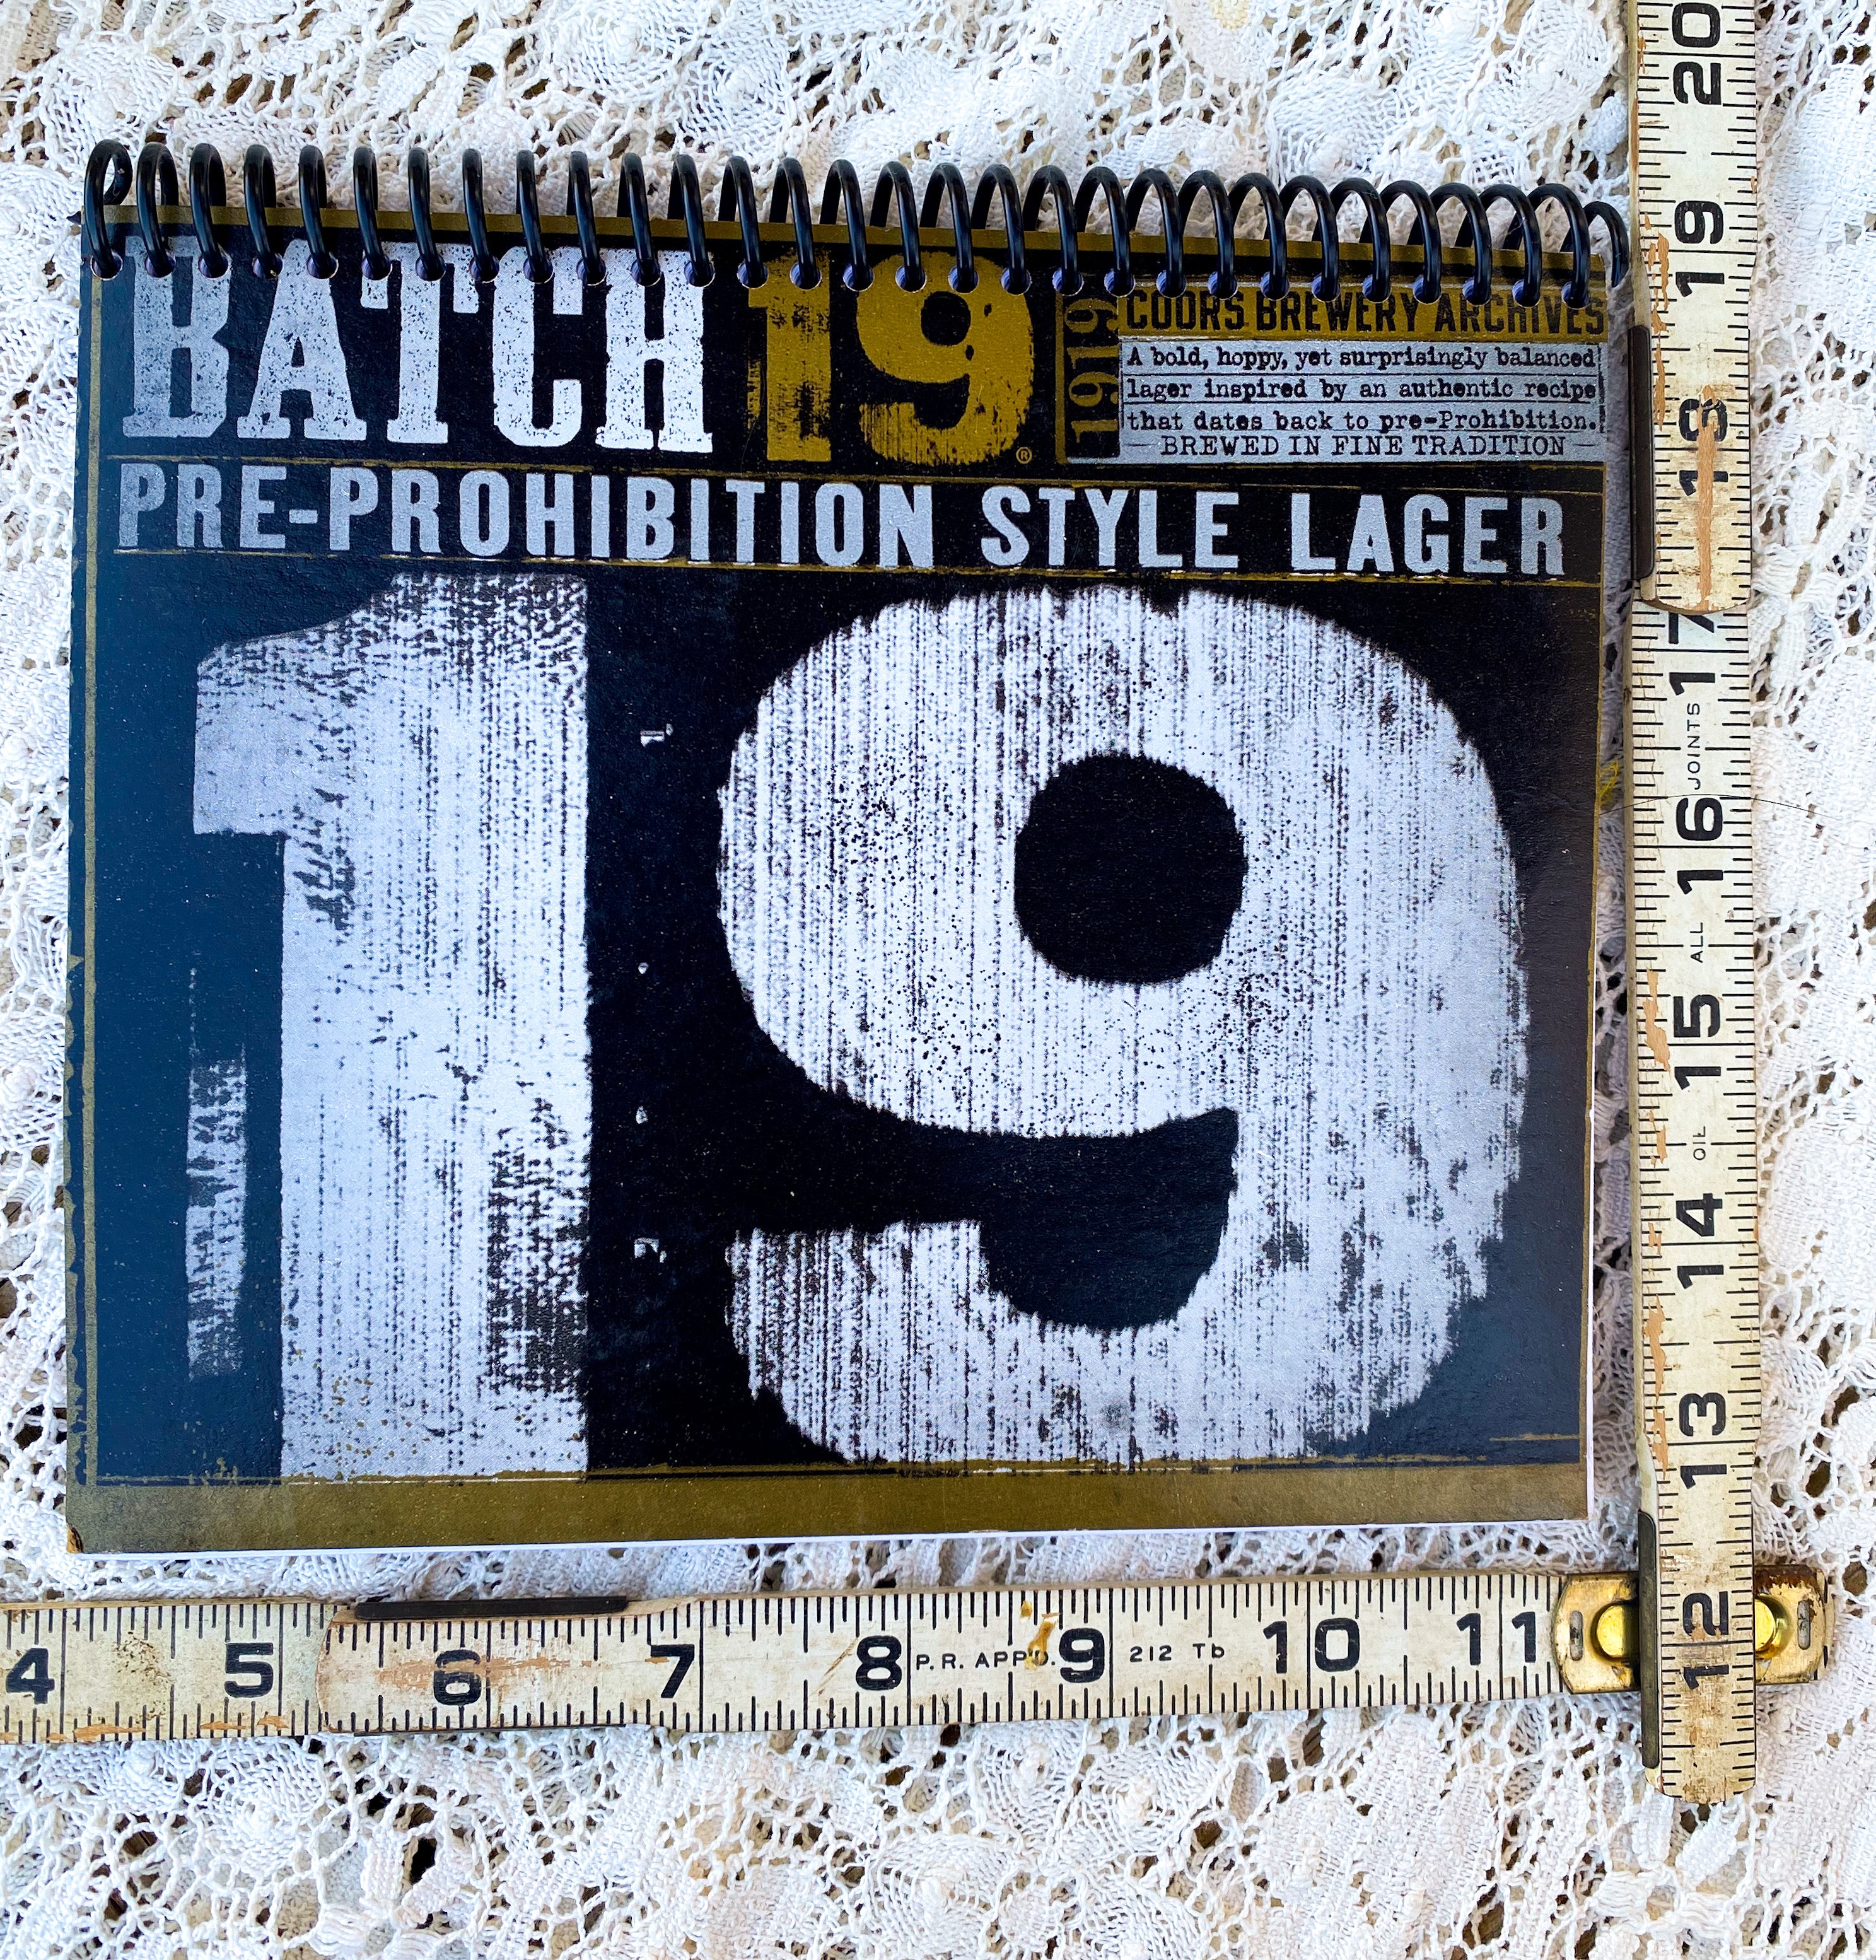 Batch 19 Recycled Beer Carton Notebook